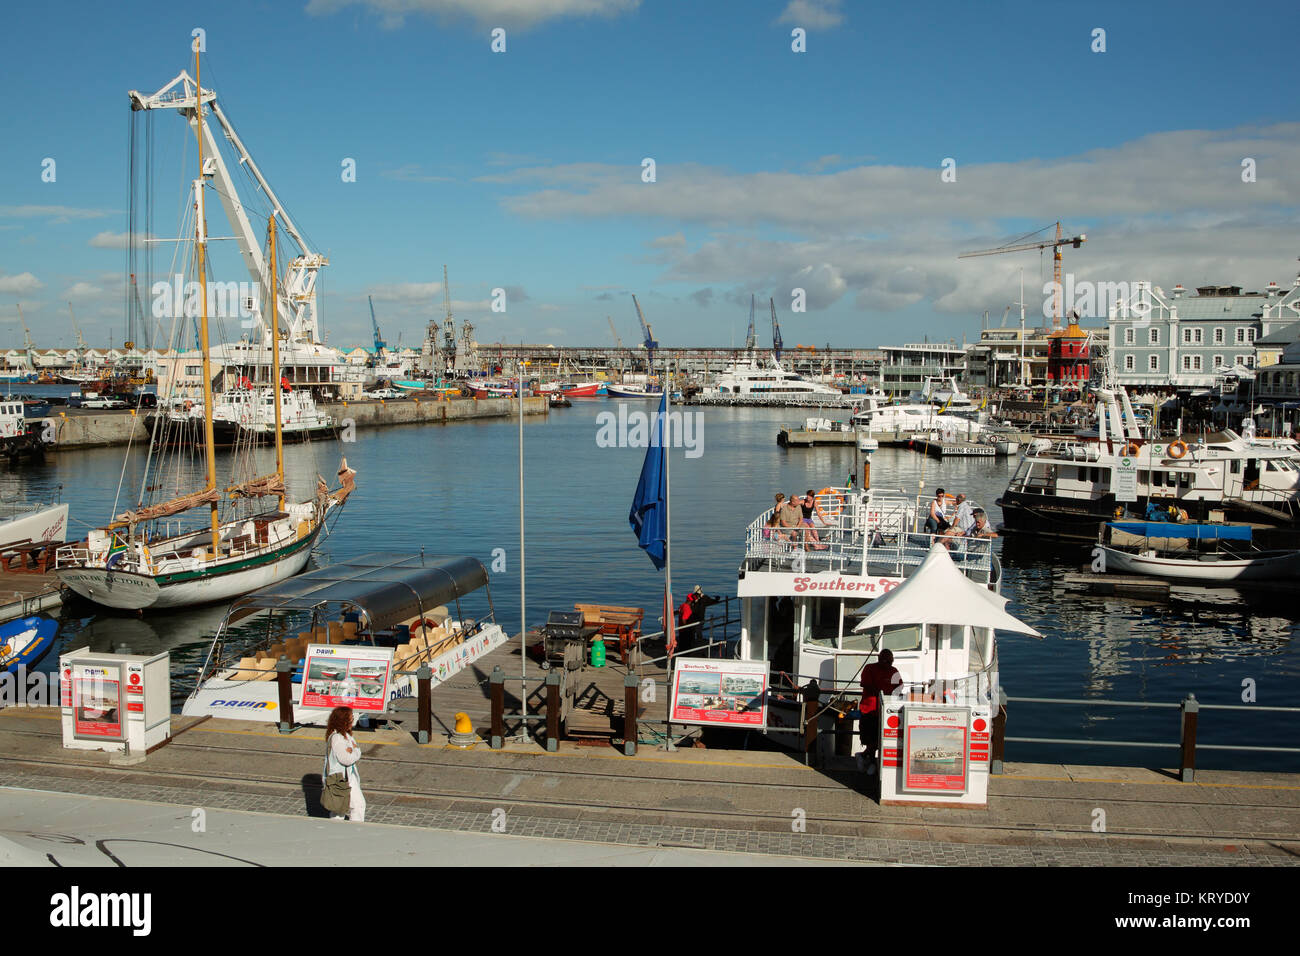 CAPE TOWN, SOUTH AFRICA - FEBRUARY 20, 2012: Victoria and Alfred Waterfront, harbor with boats, shops and restaurants popular with tourists. Stock Photo